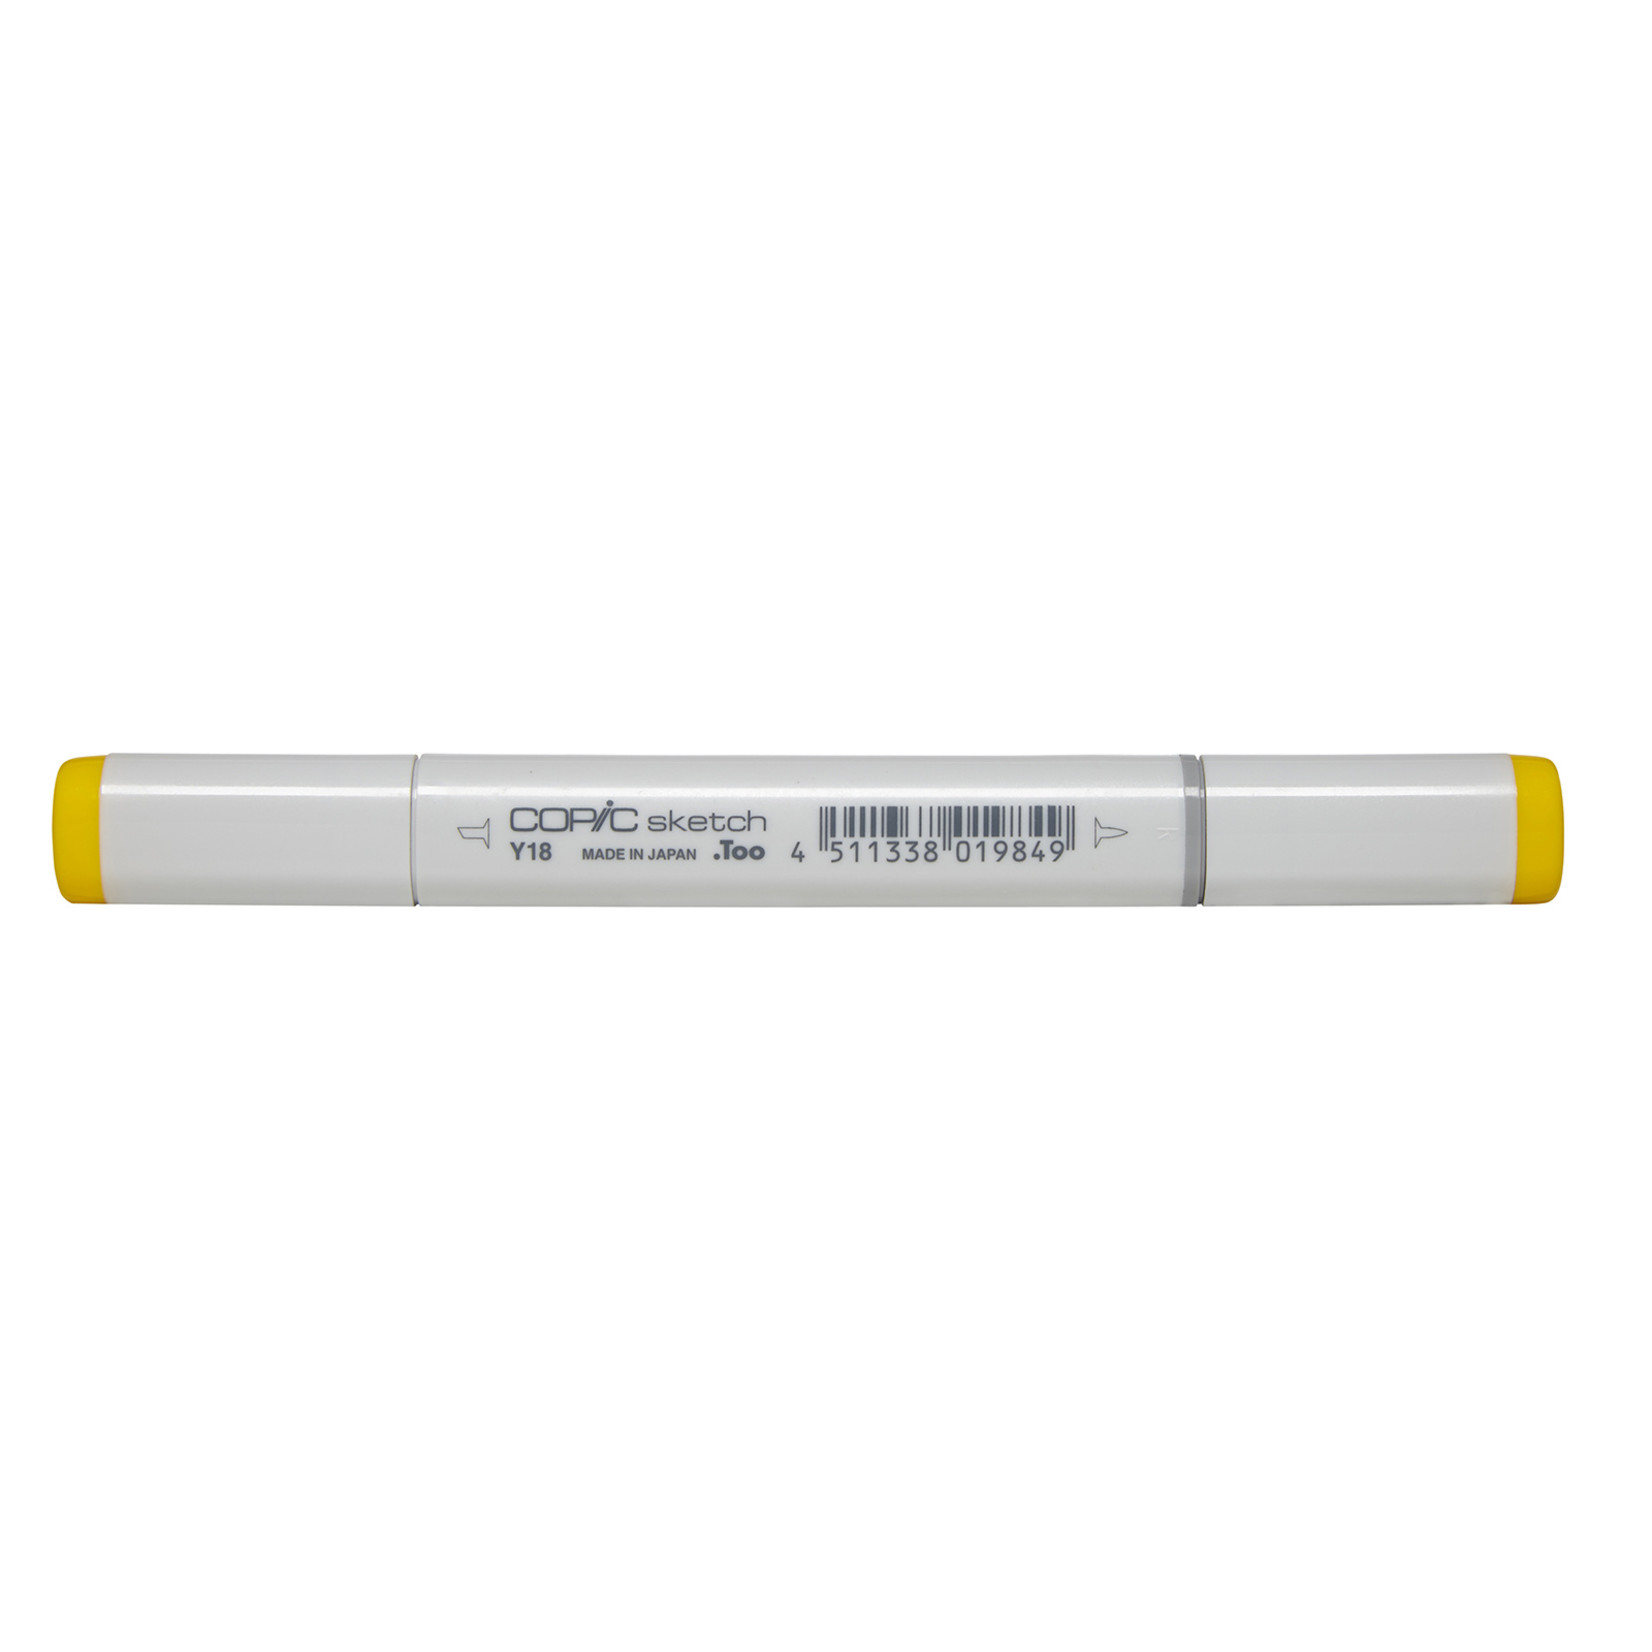 COPIC COPIC SKETCH Y18 LIGHTNING YELLOW